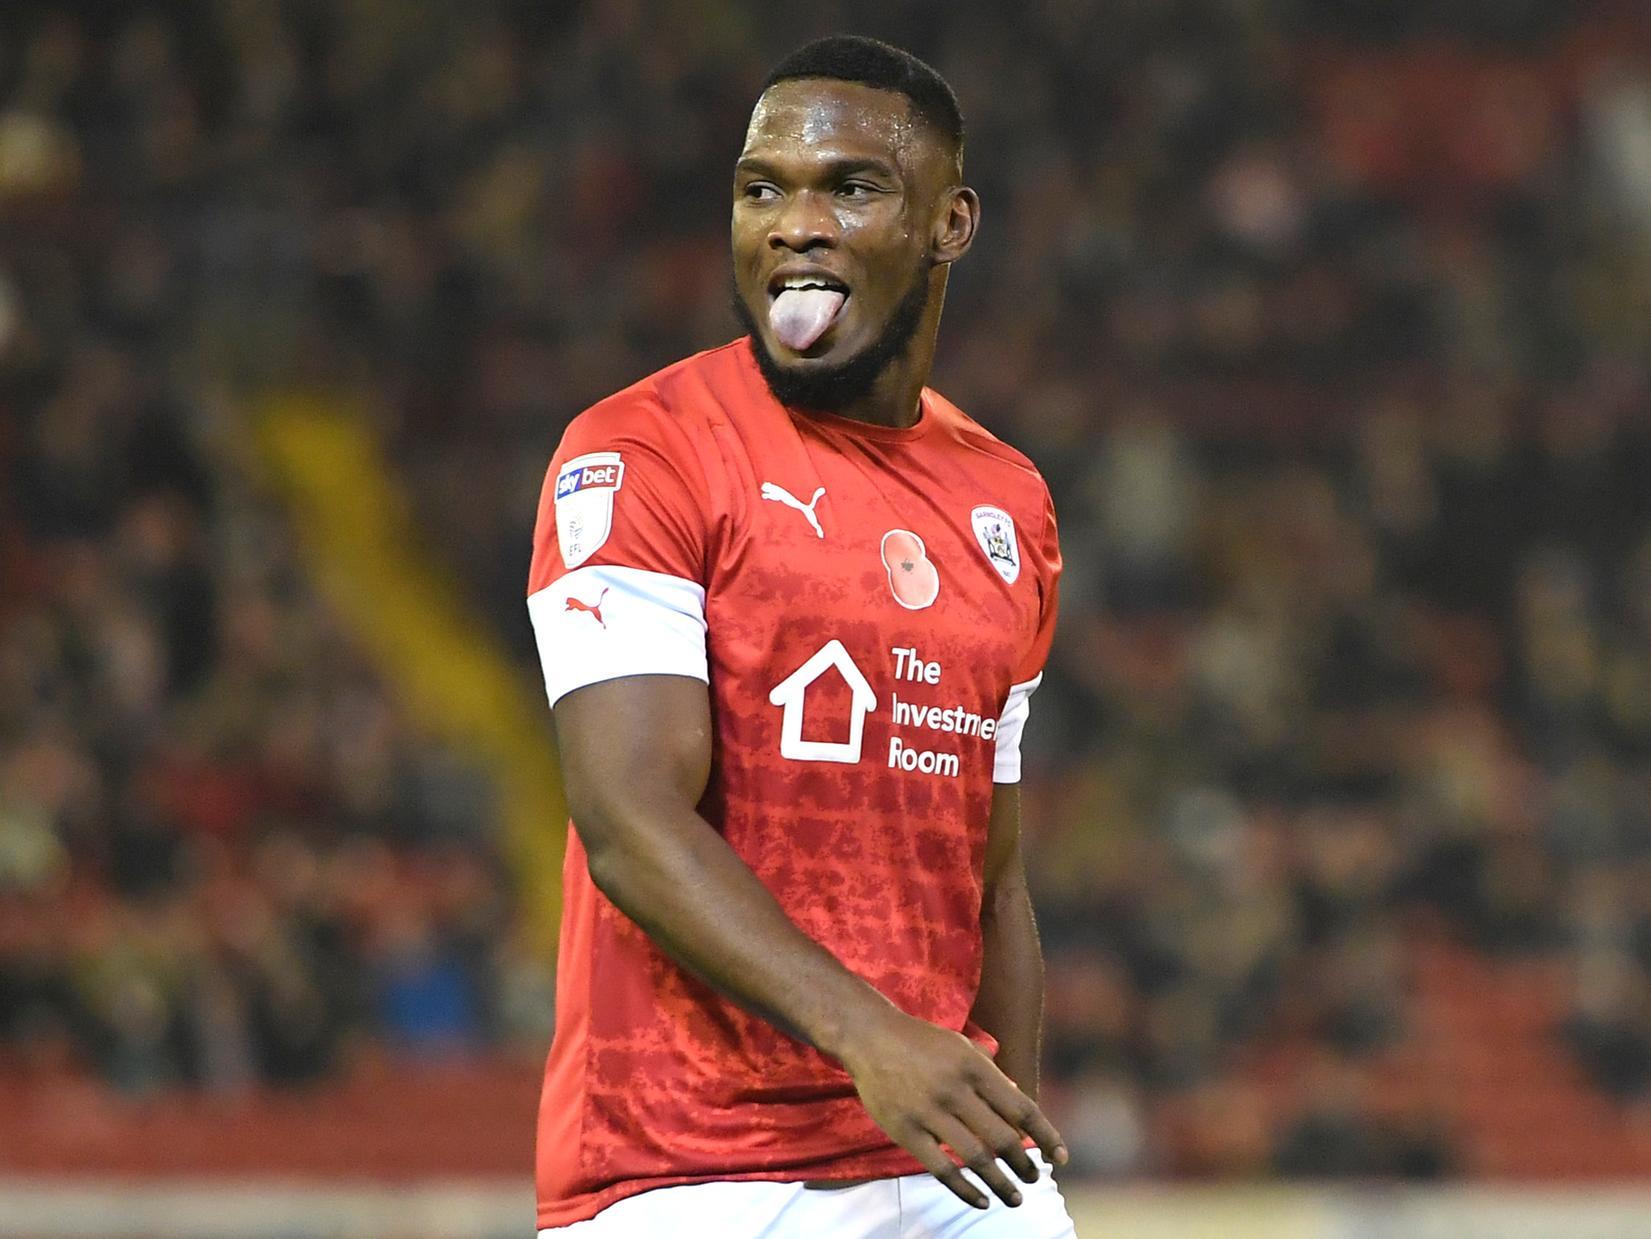 Swiss outfit FC Sion have snapped up right-back Dimitri Cavare from Barnsley. The 25-year-old made 41 appearances for the side last season as they secured promotion up from League One.